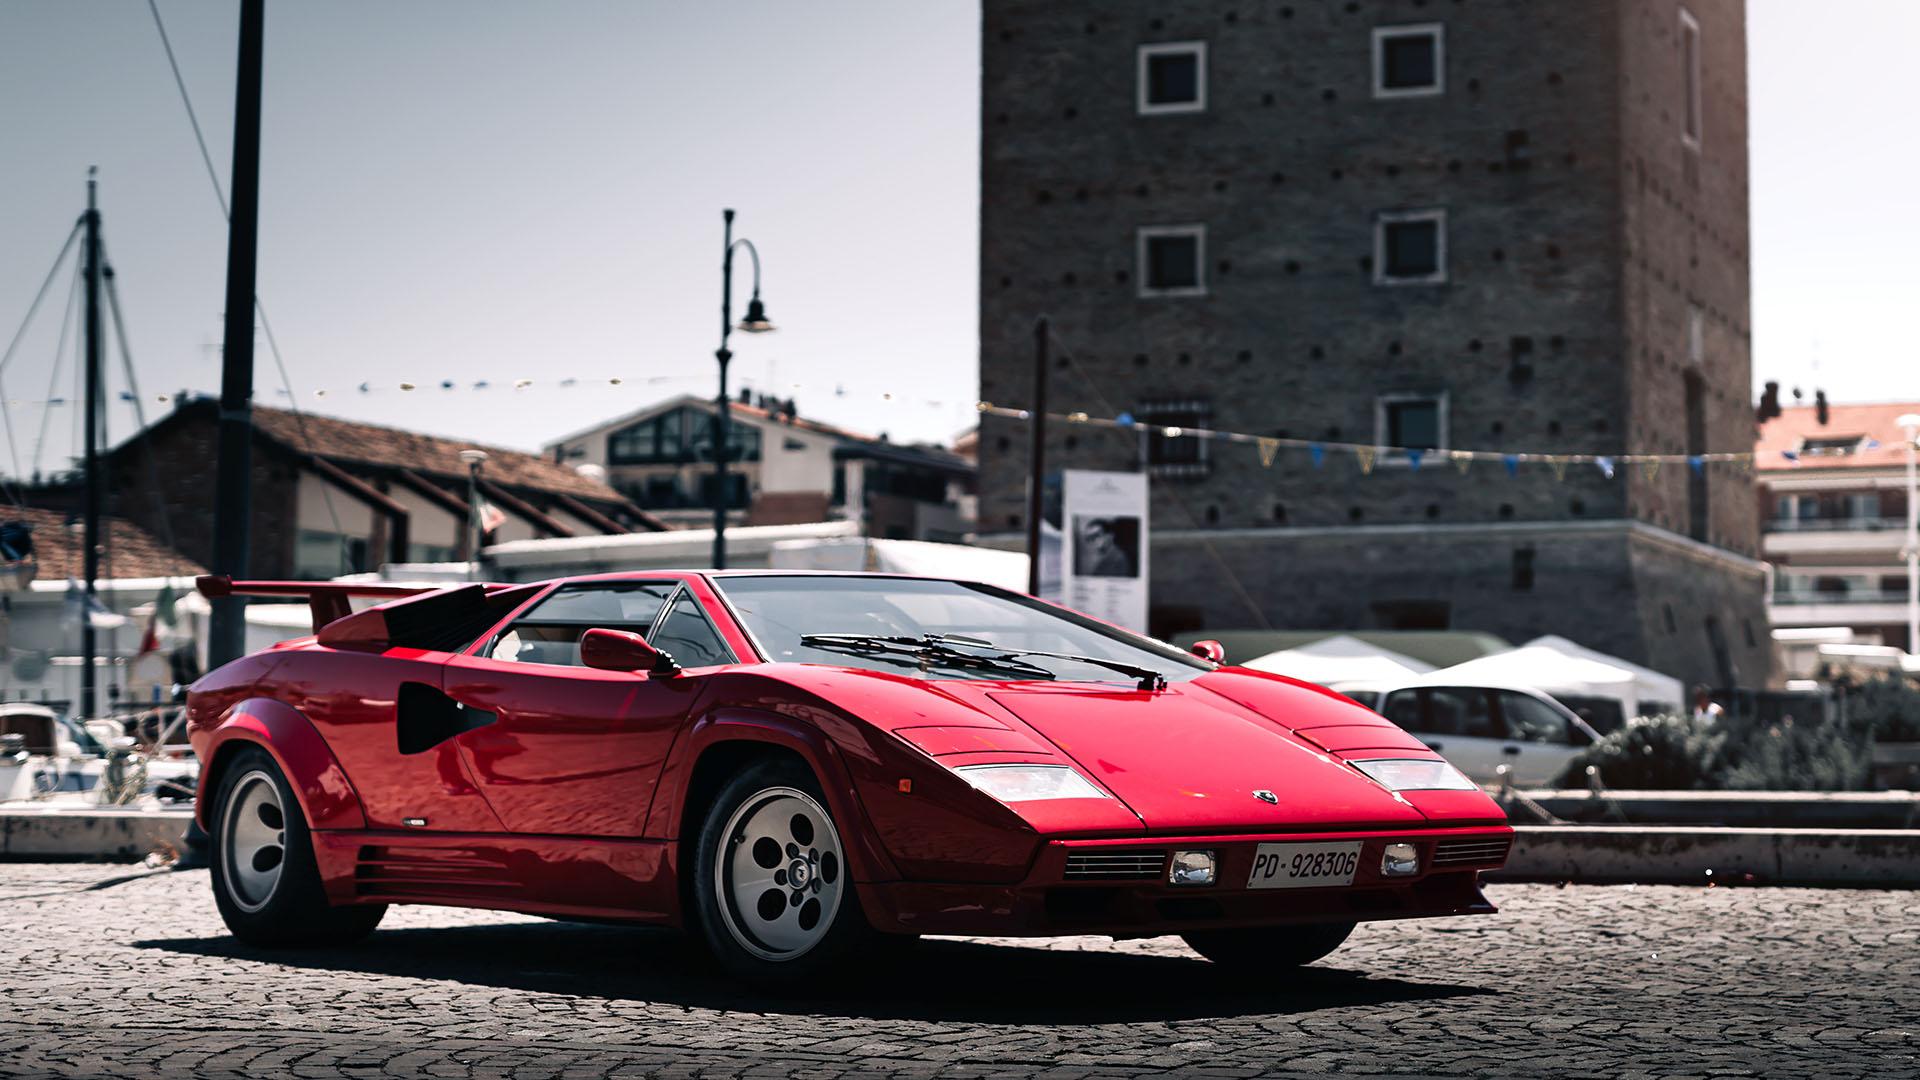 Countach and lm002 v12 7